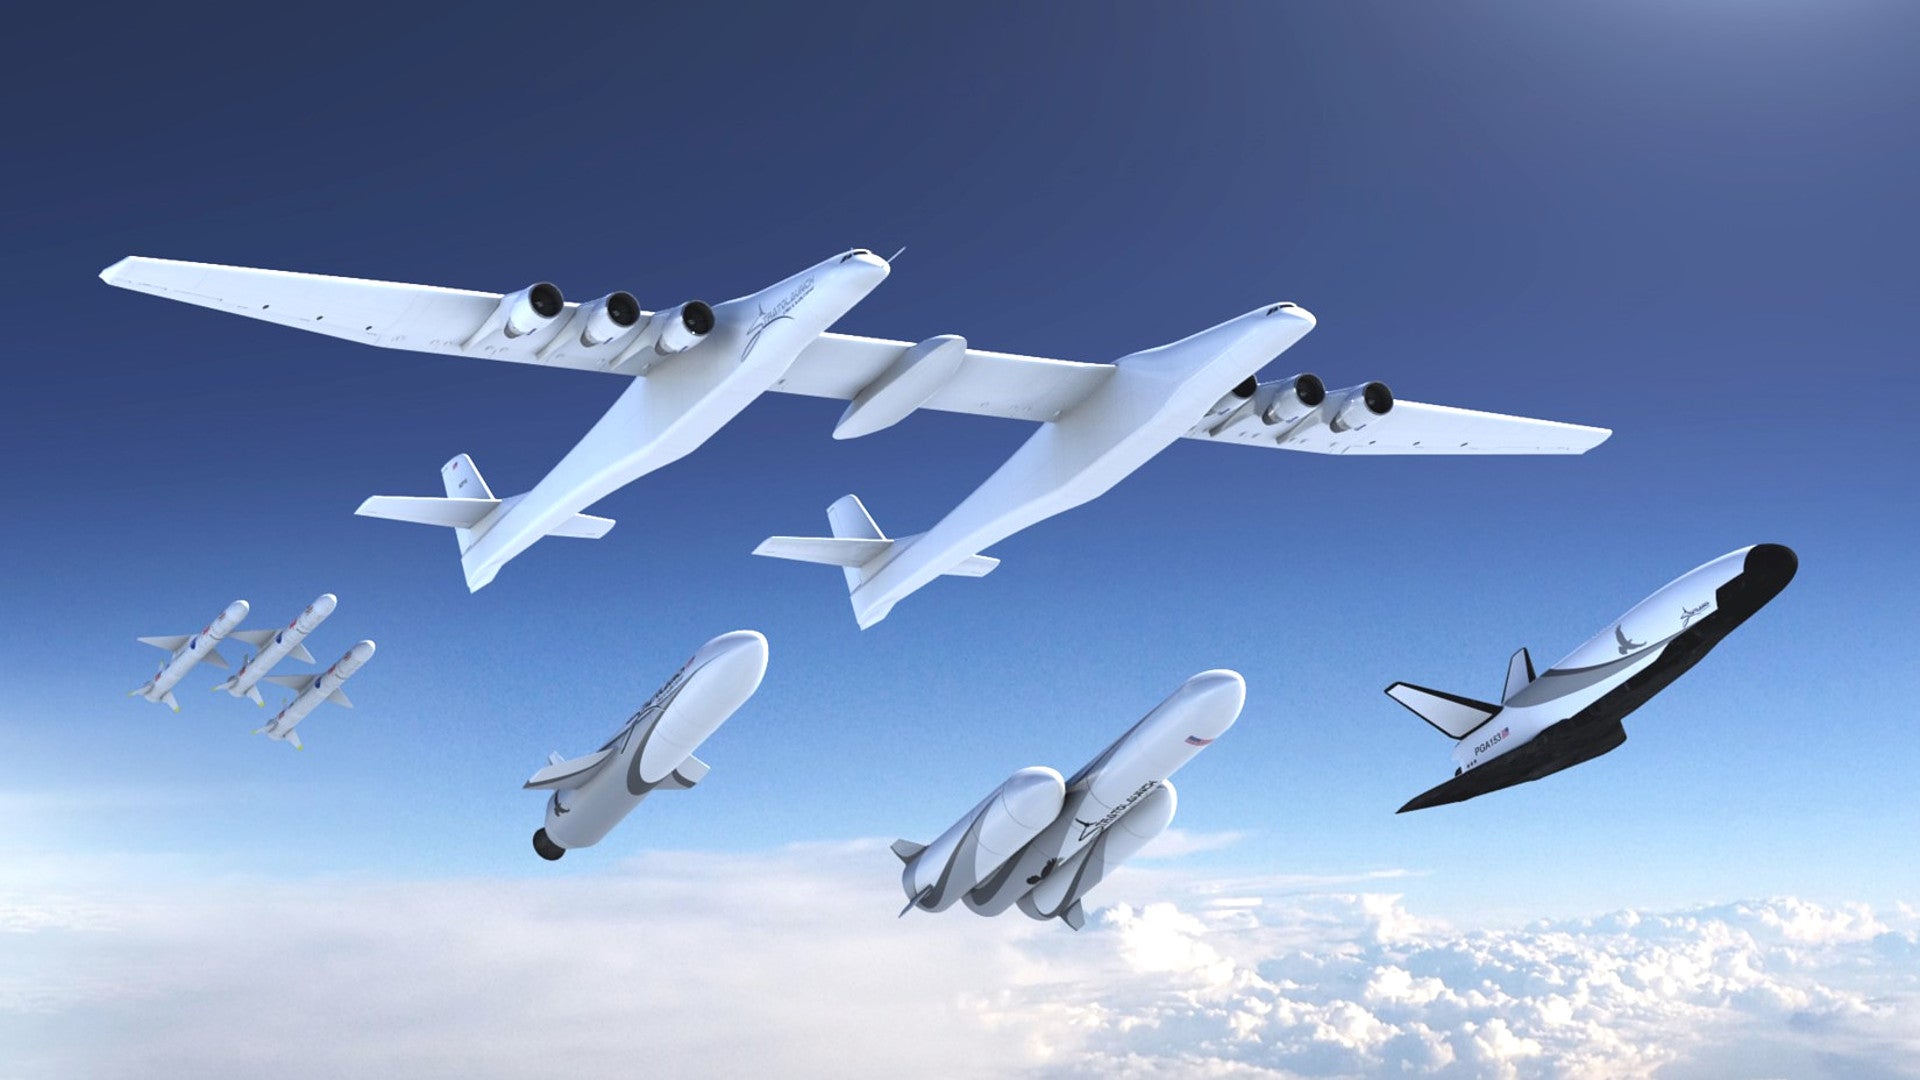 Meet Stratolaunch’s Family Of Space Launch Vehicles For Its Huge ‘Roc’ Mothership